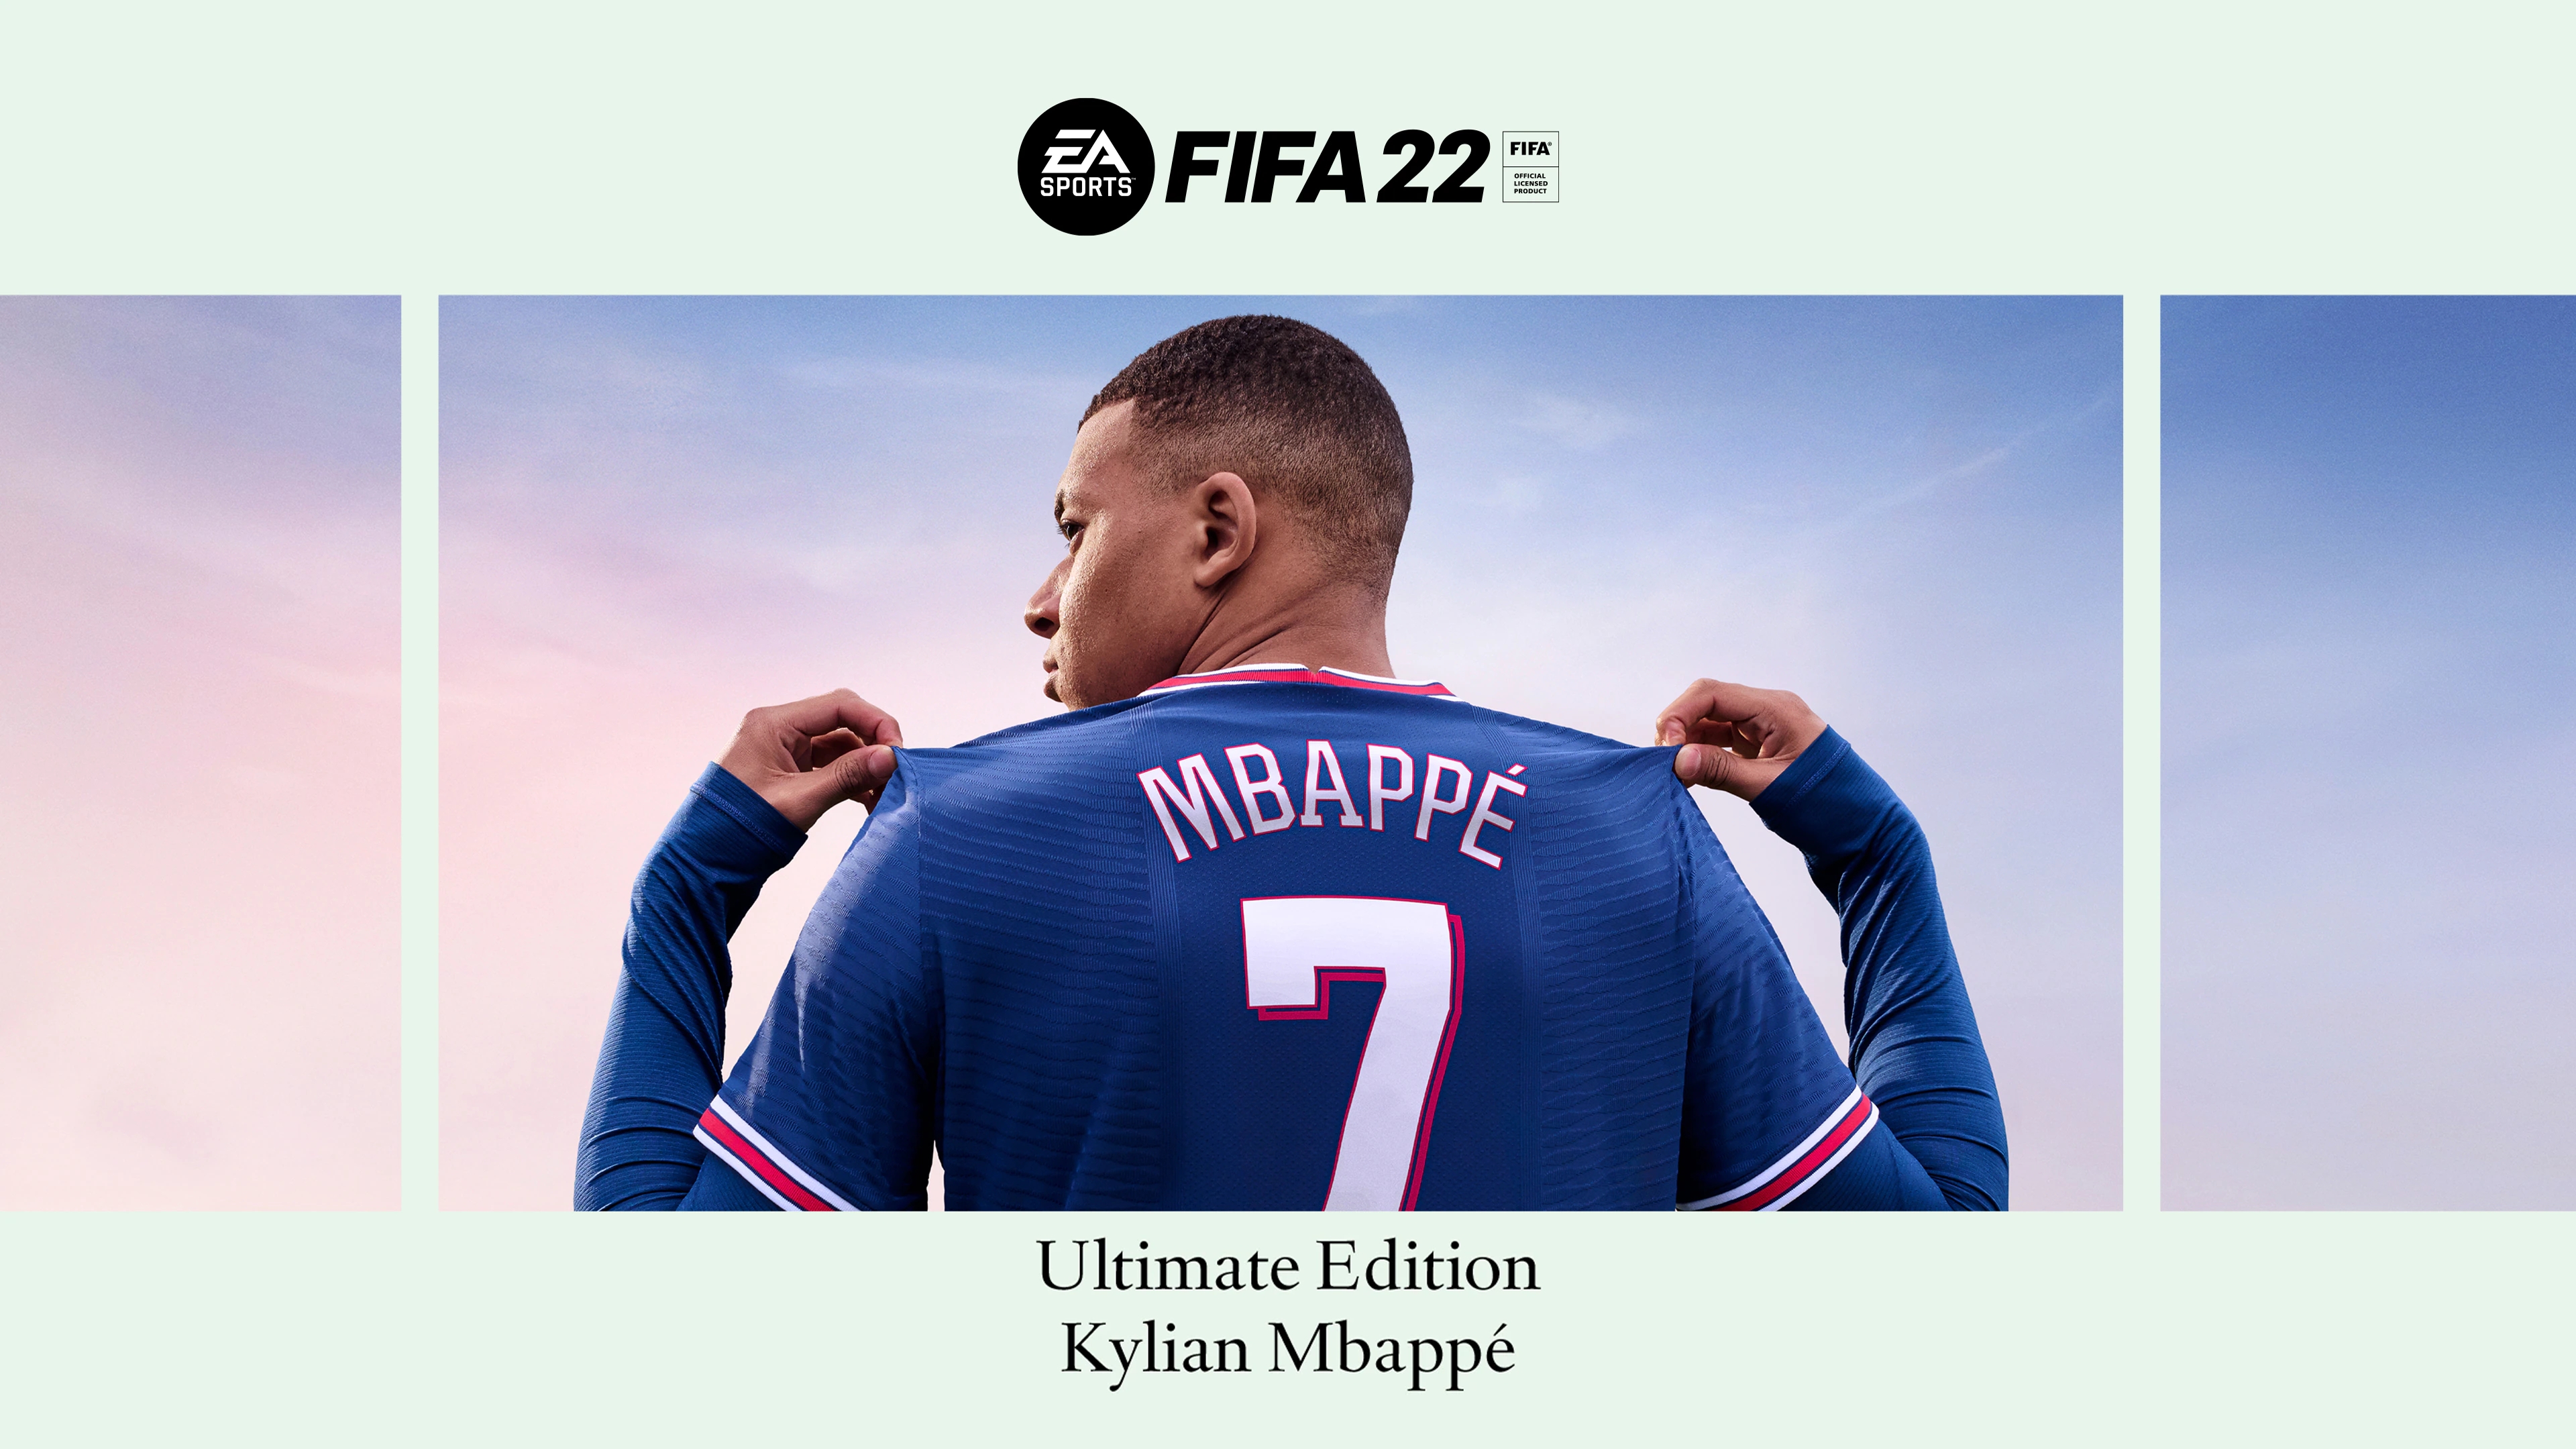 Bought fifa 23 ultimate edition on steam, does anybody knows if i